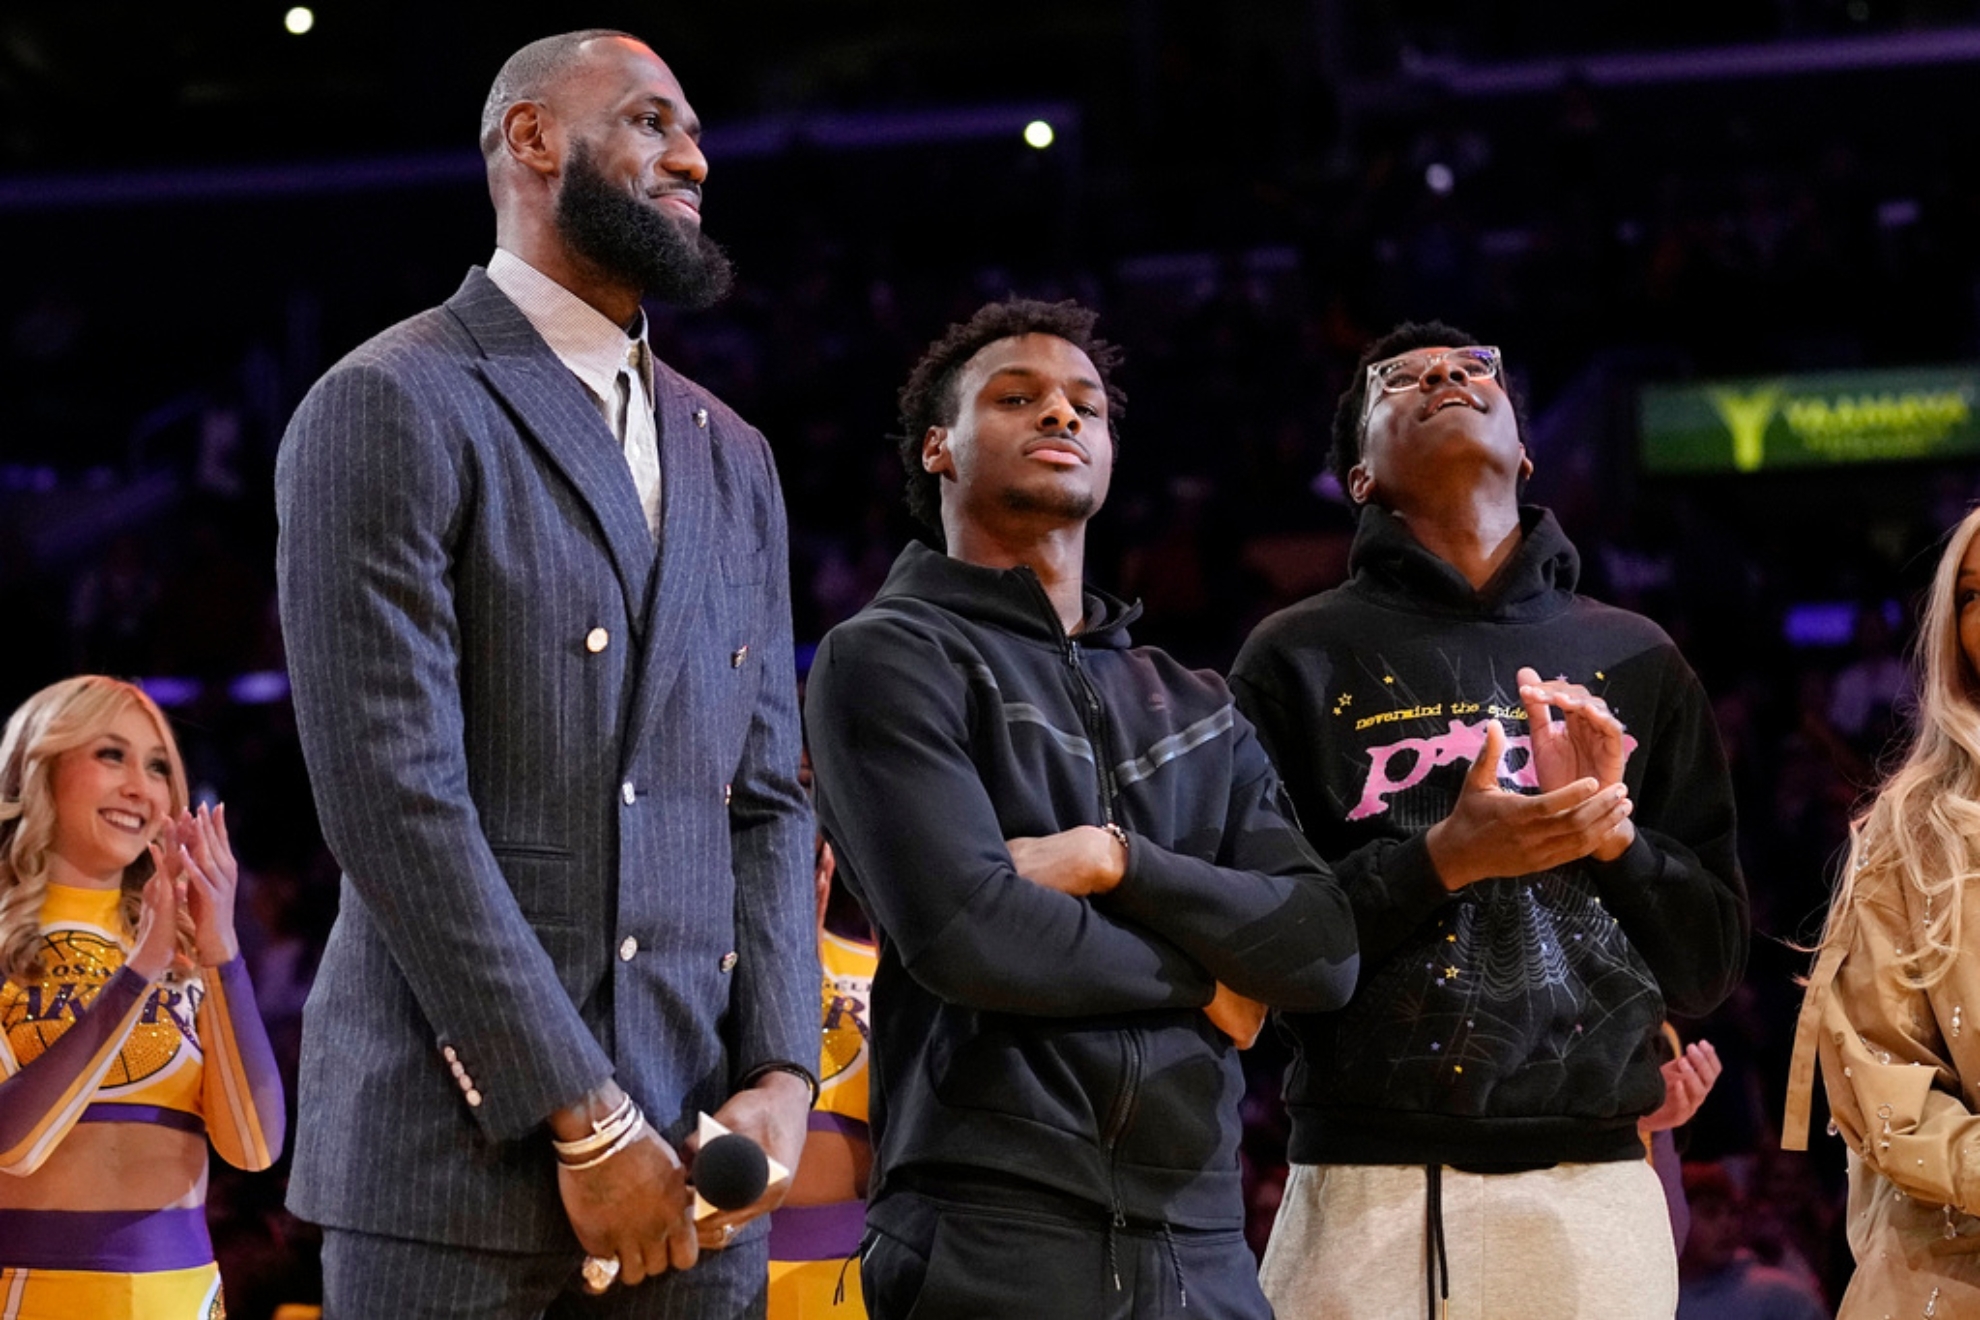 Bronny is still not cleared to play but will be available soon